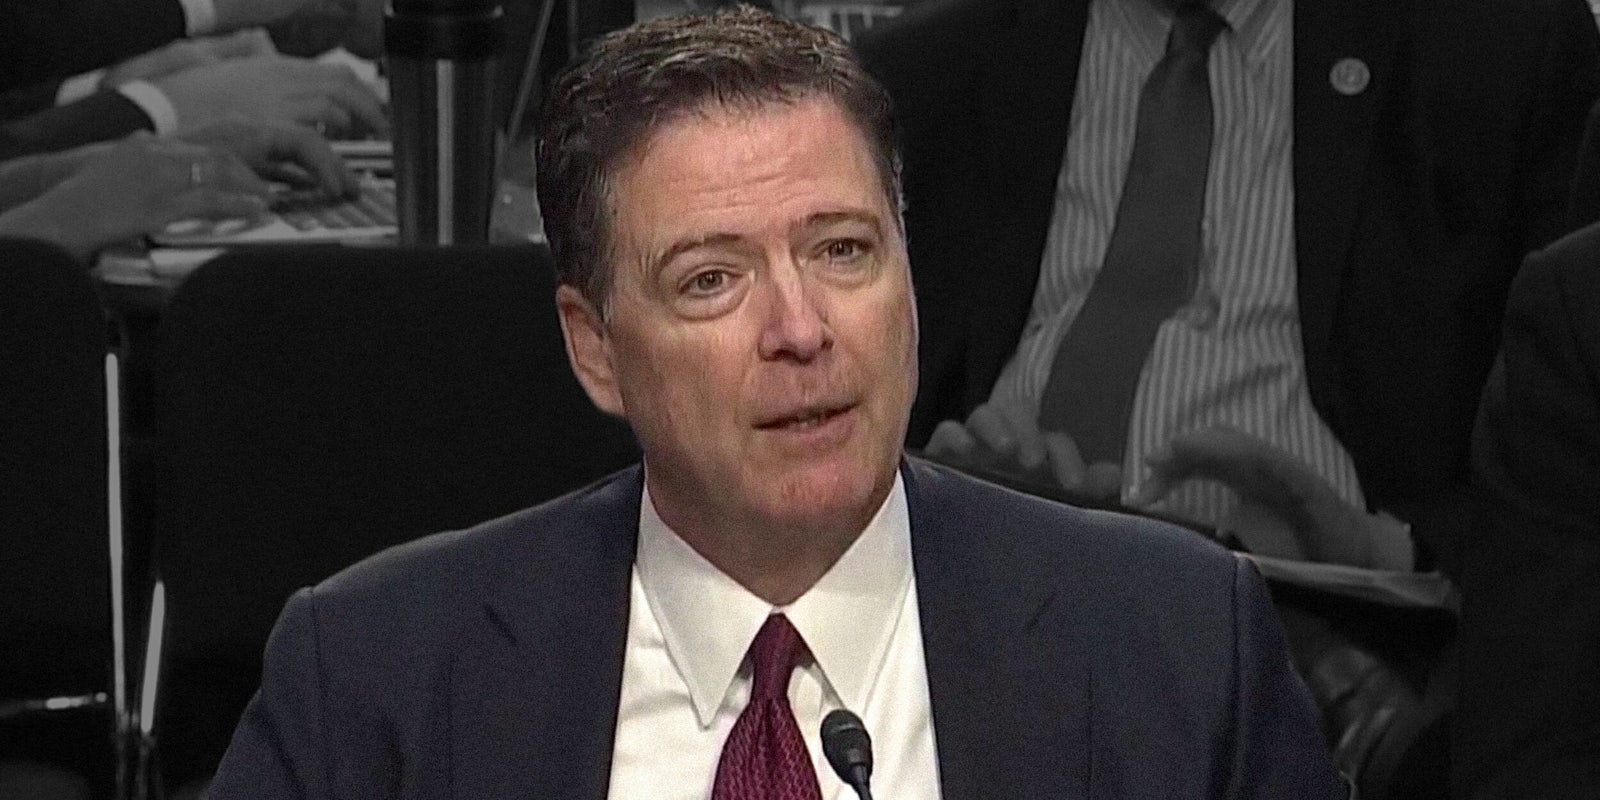 James Comey testifying before Senate Intelligence Committee. He hopes there are tapes of him and Trump speaking.